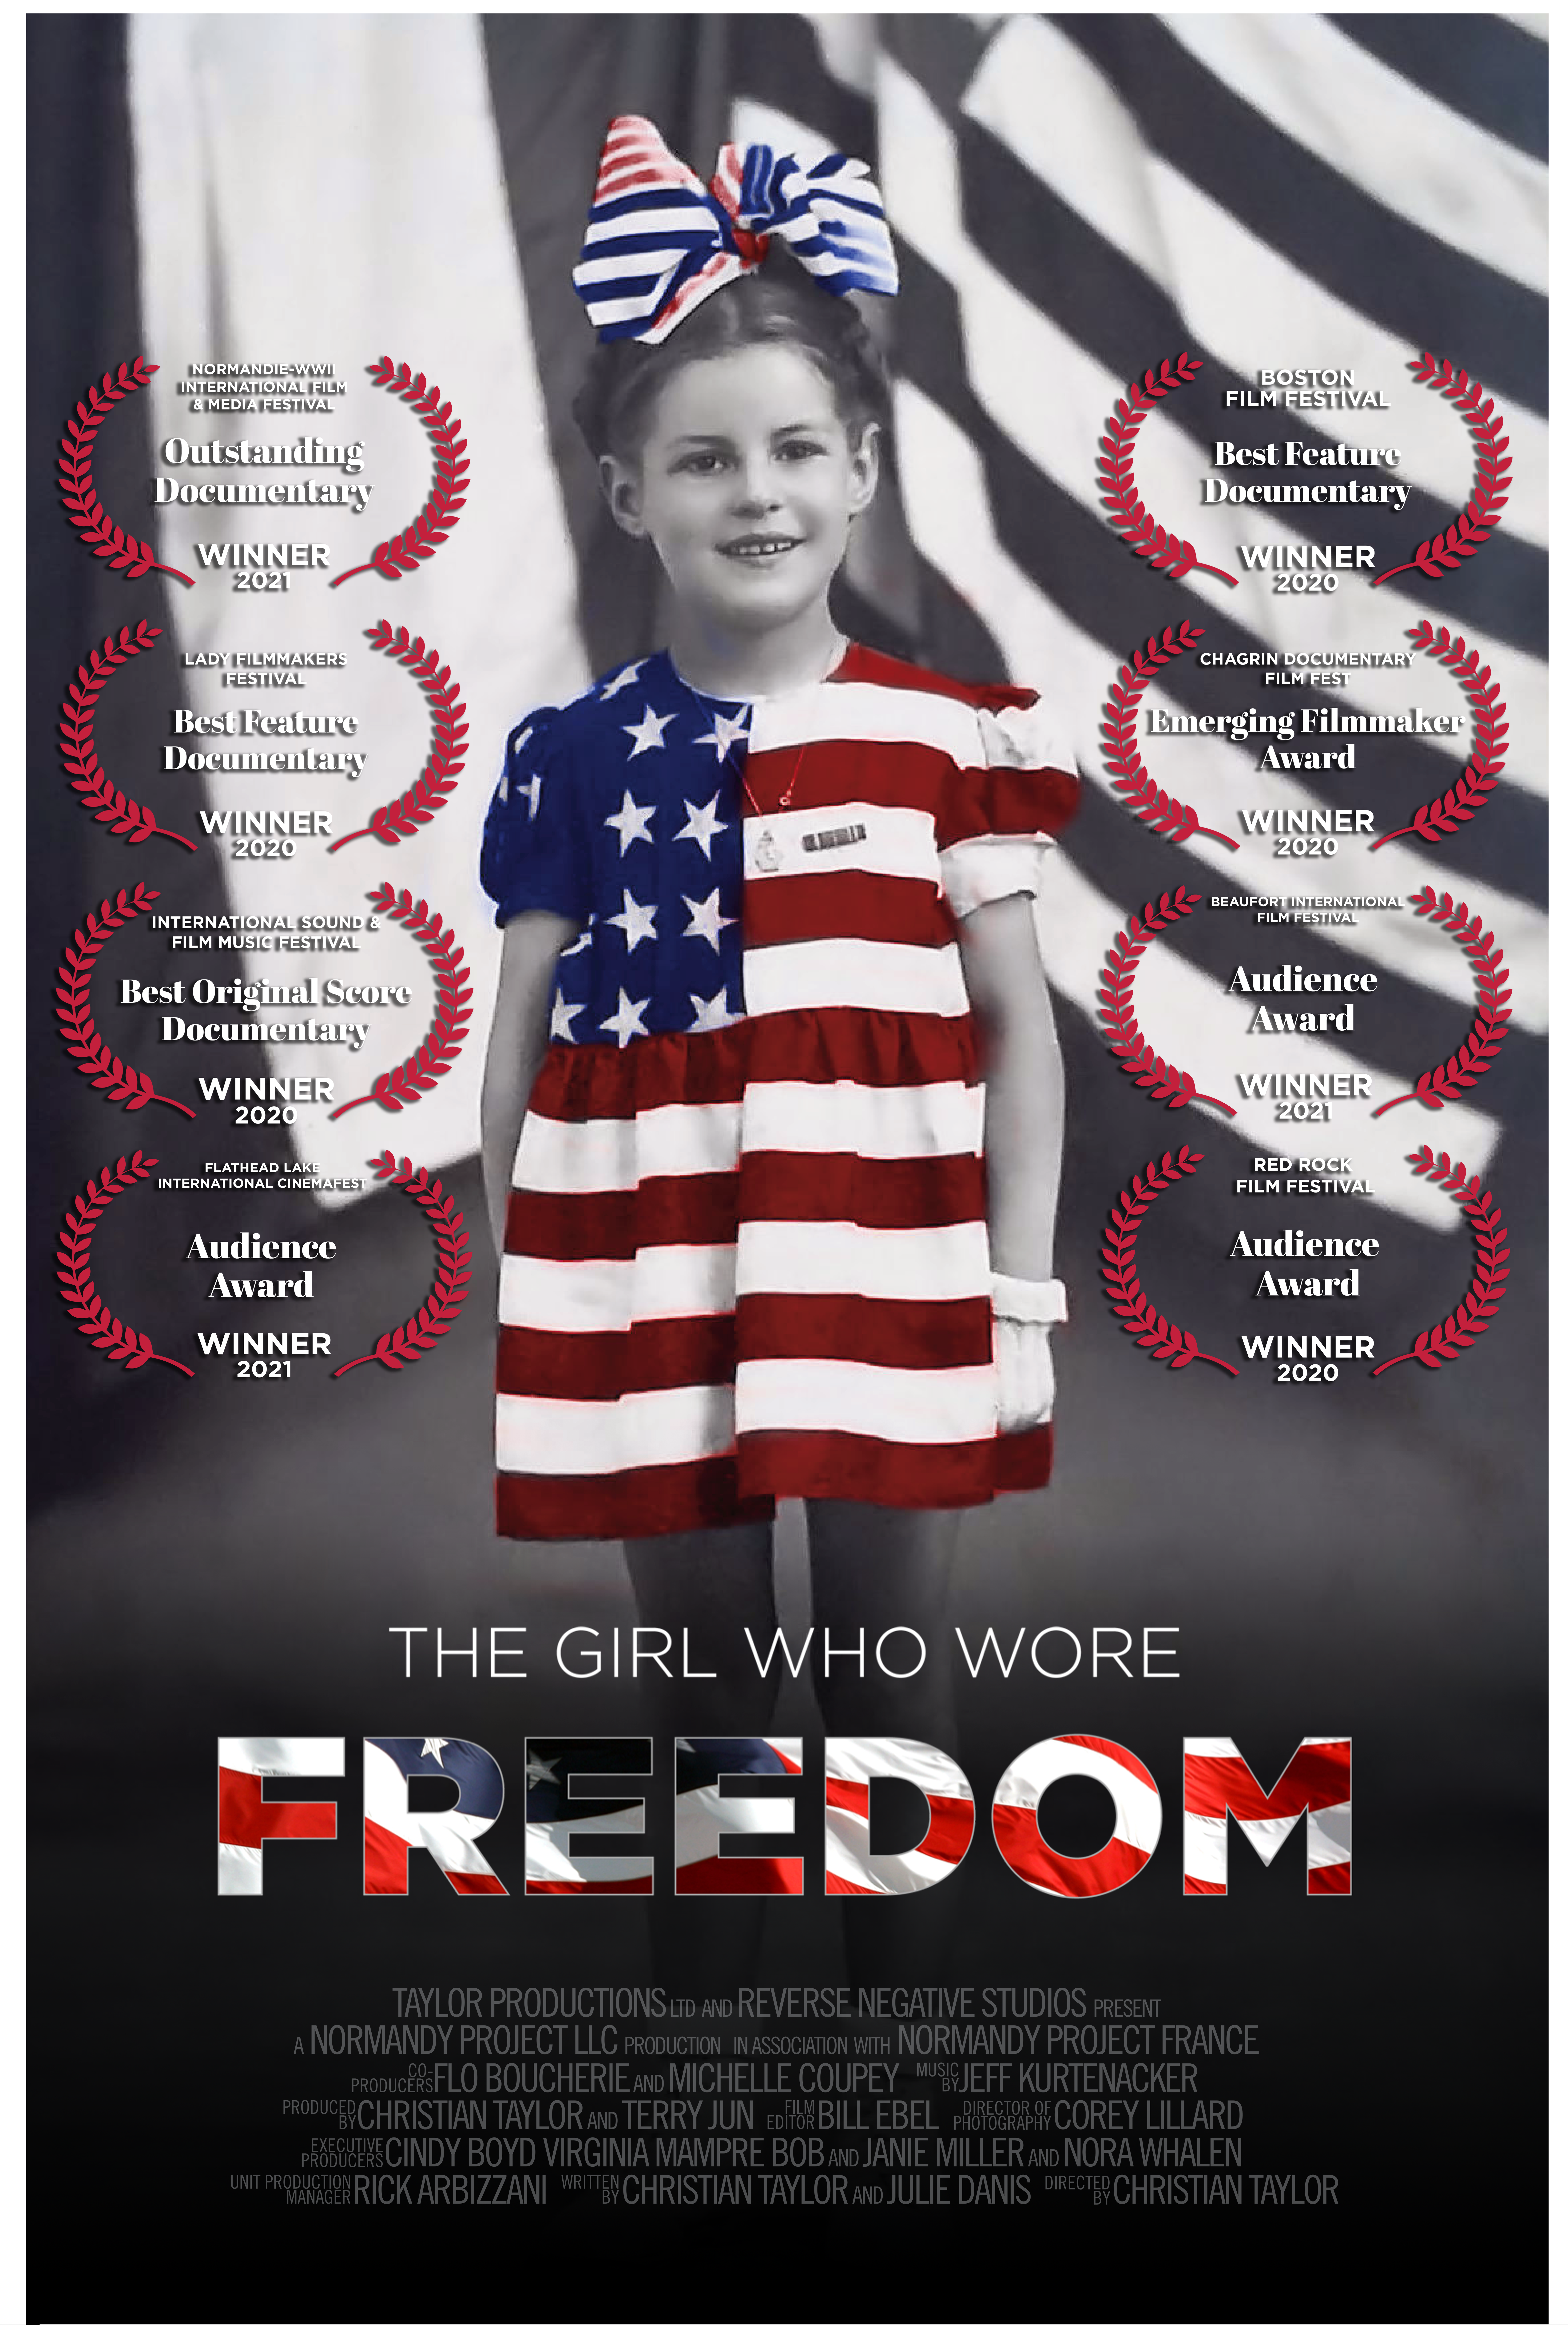 The movie poster of The Girl Who Wore Freedom with the laurels and awards that the film has received in a vertical format